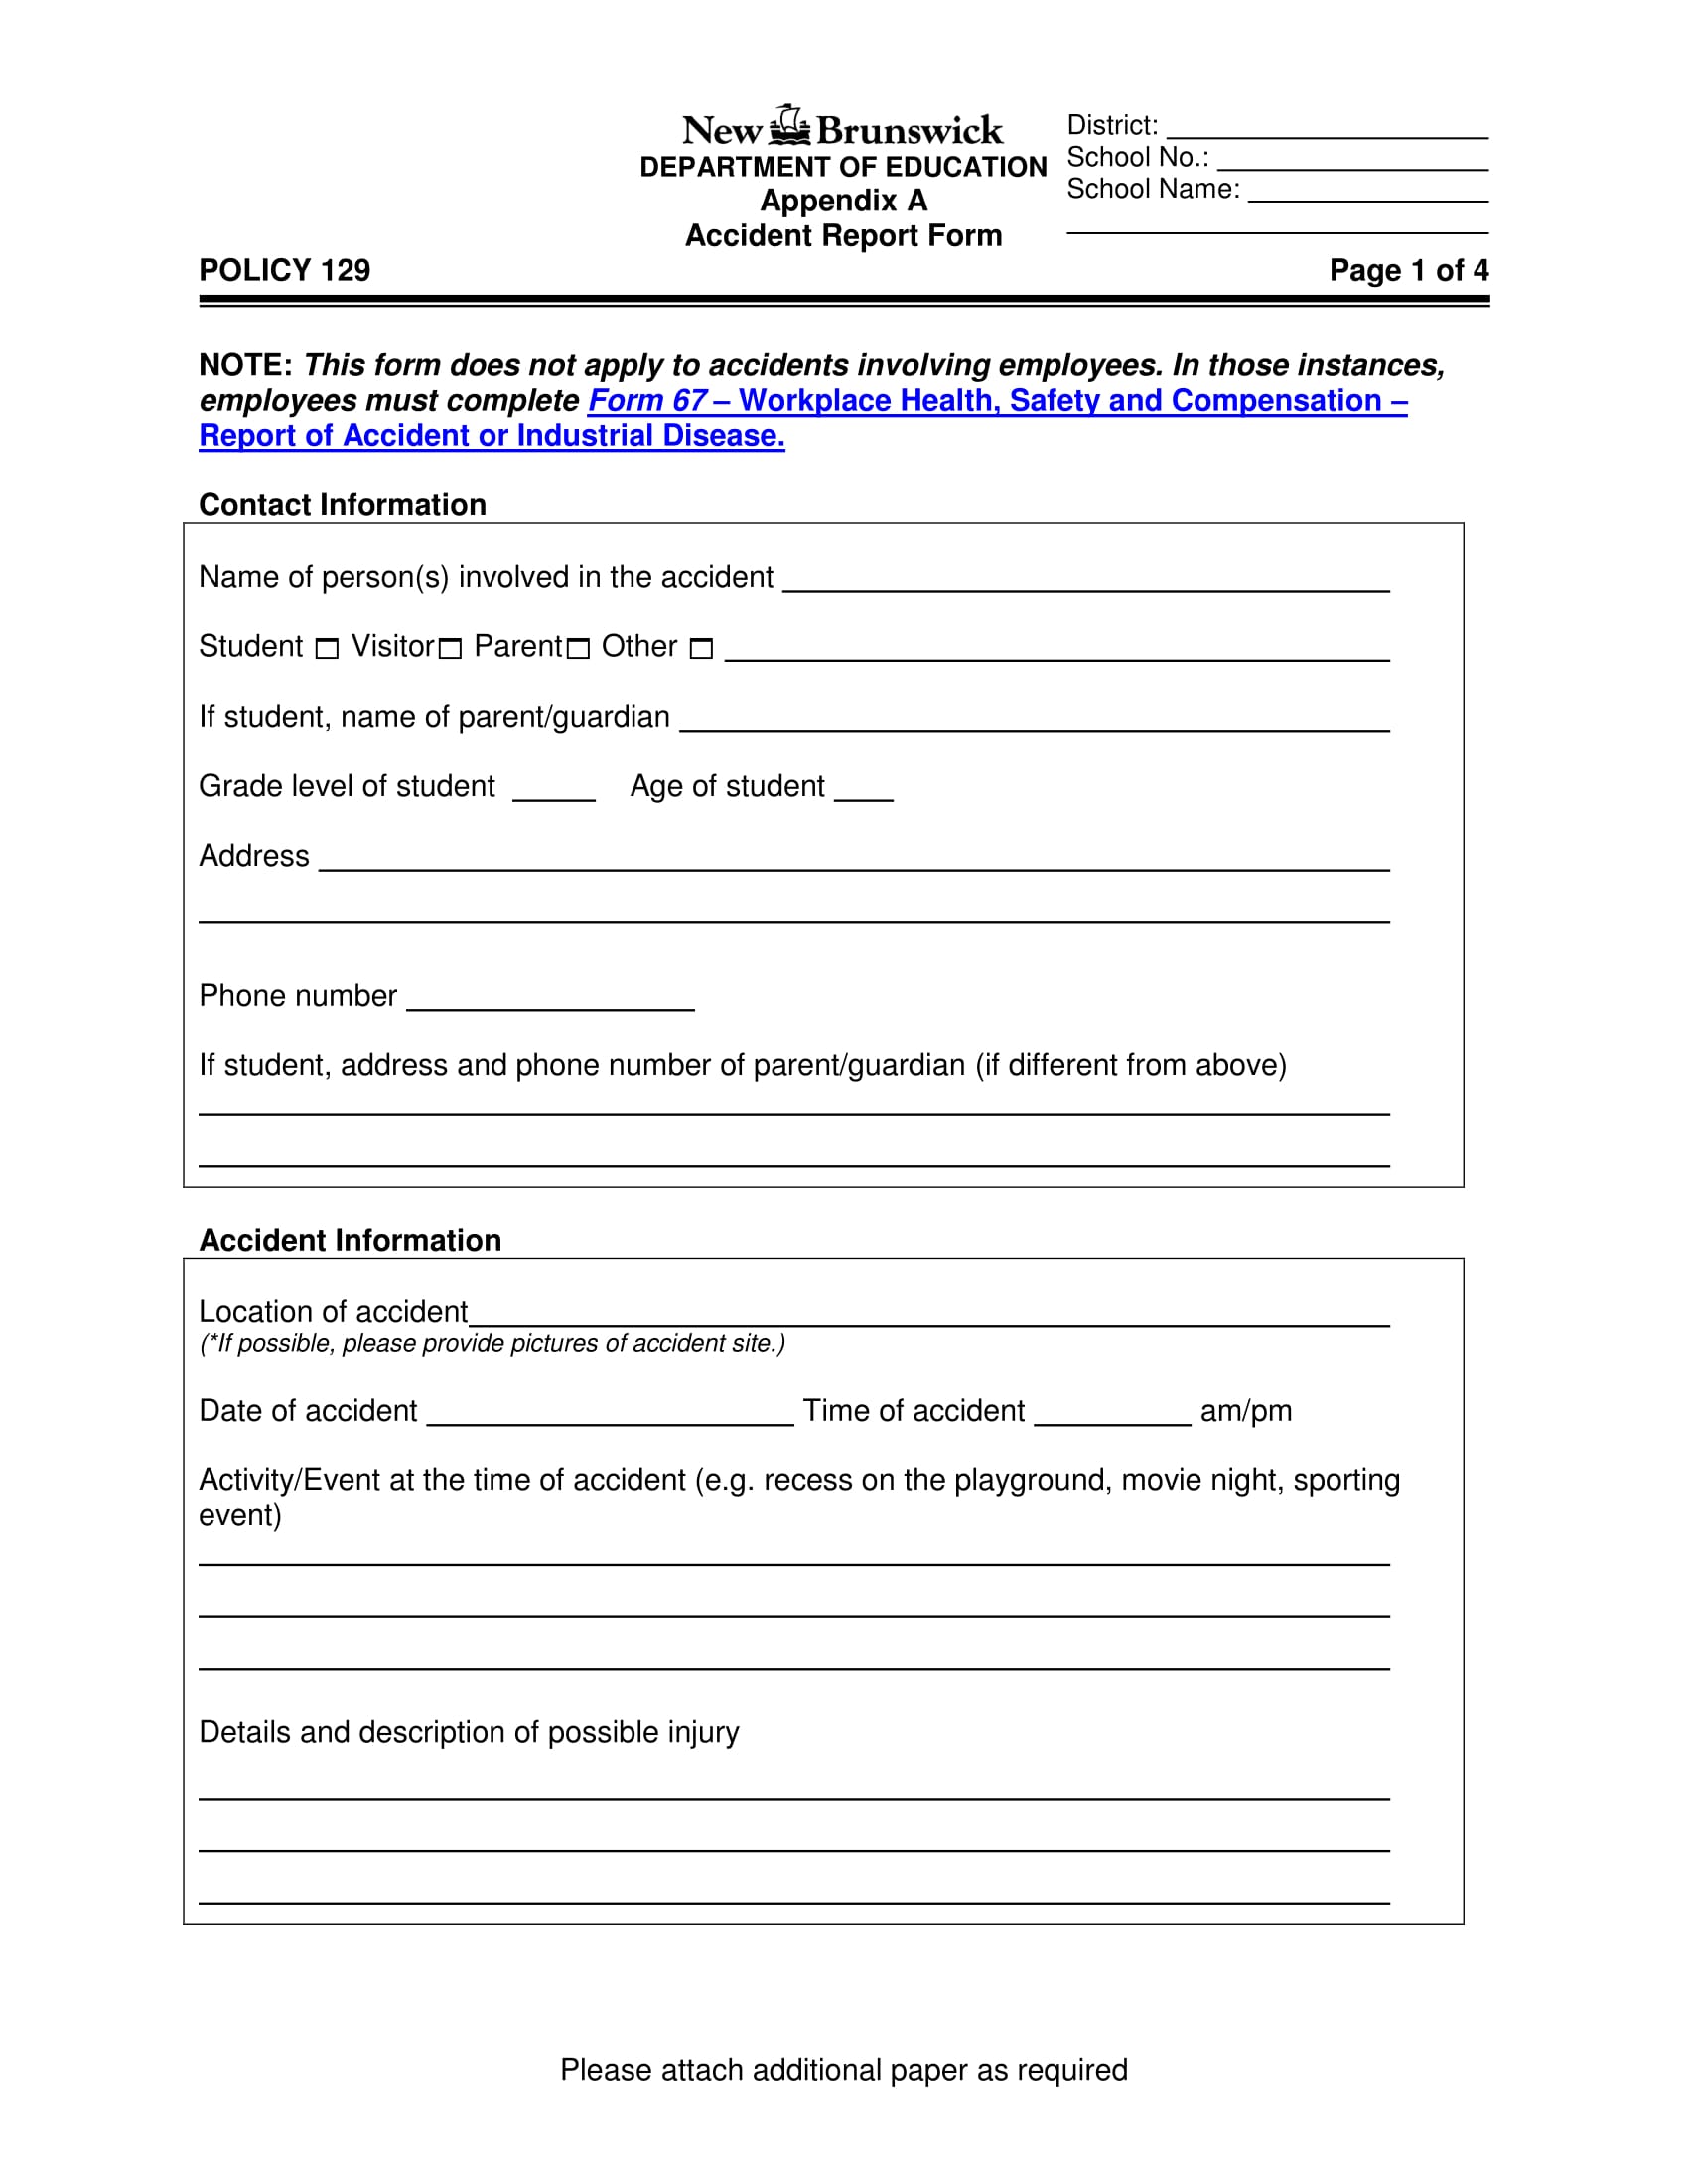 student accident report information form 1